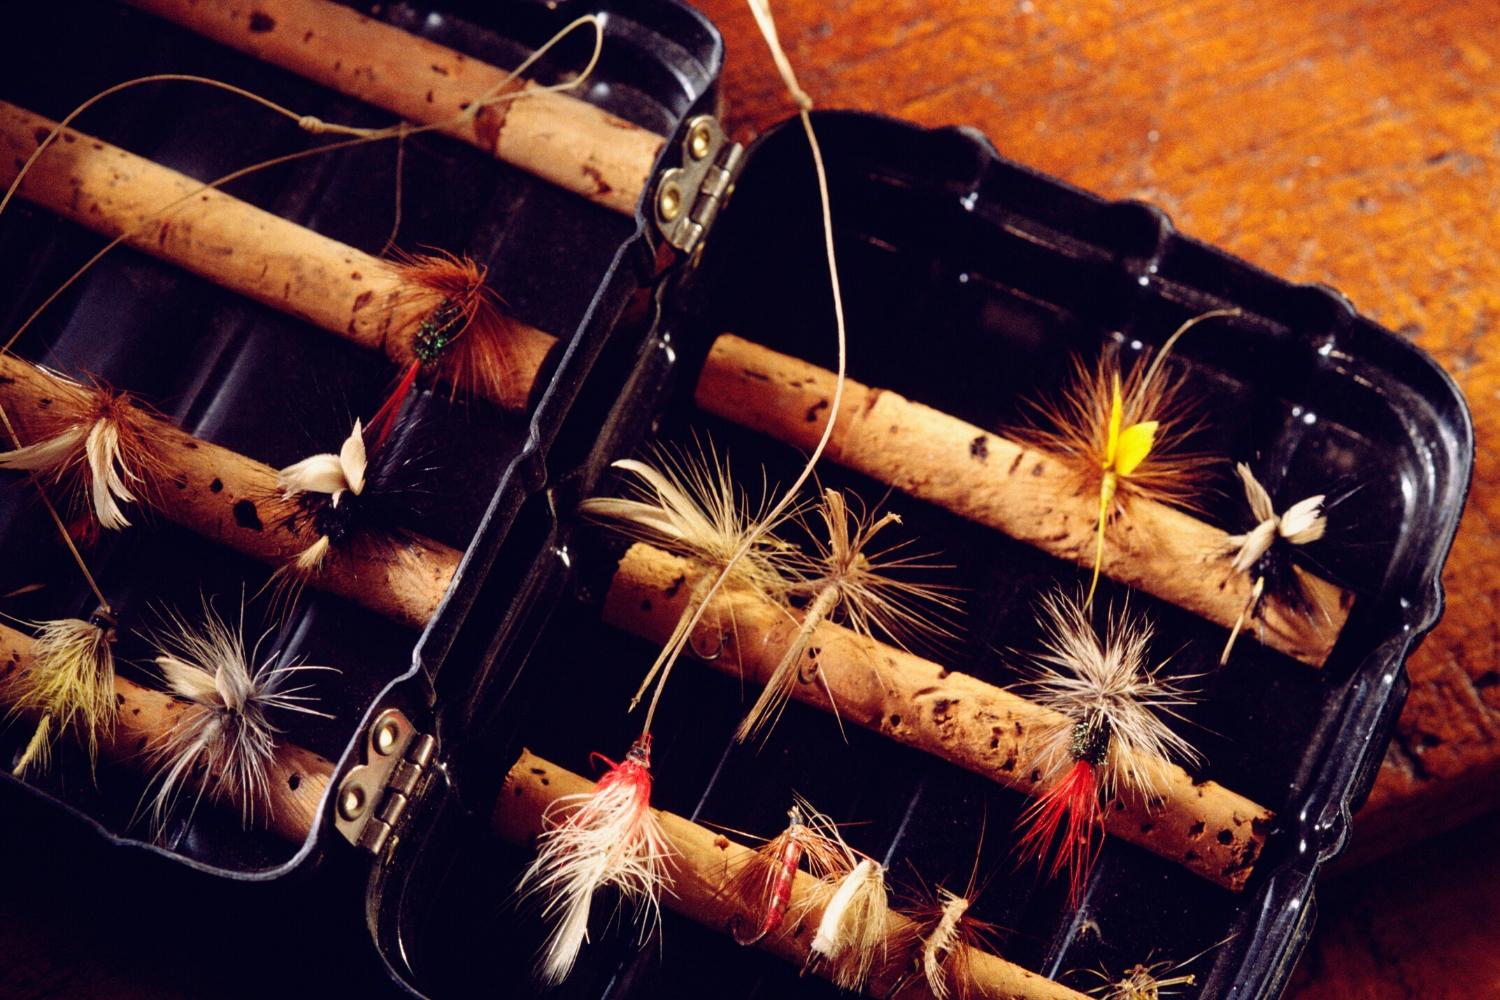 How To Keep Dry Flies From Sinking: 5 Simple Tips - Fly Fishing Fix